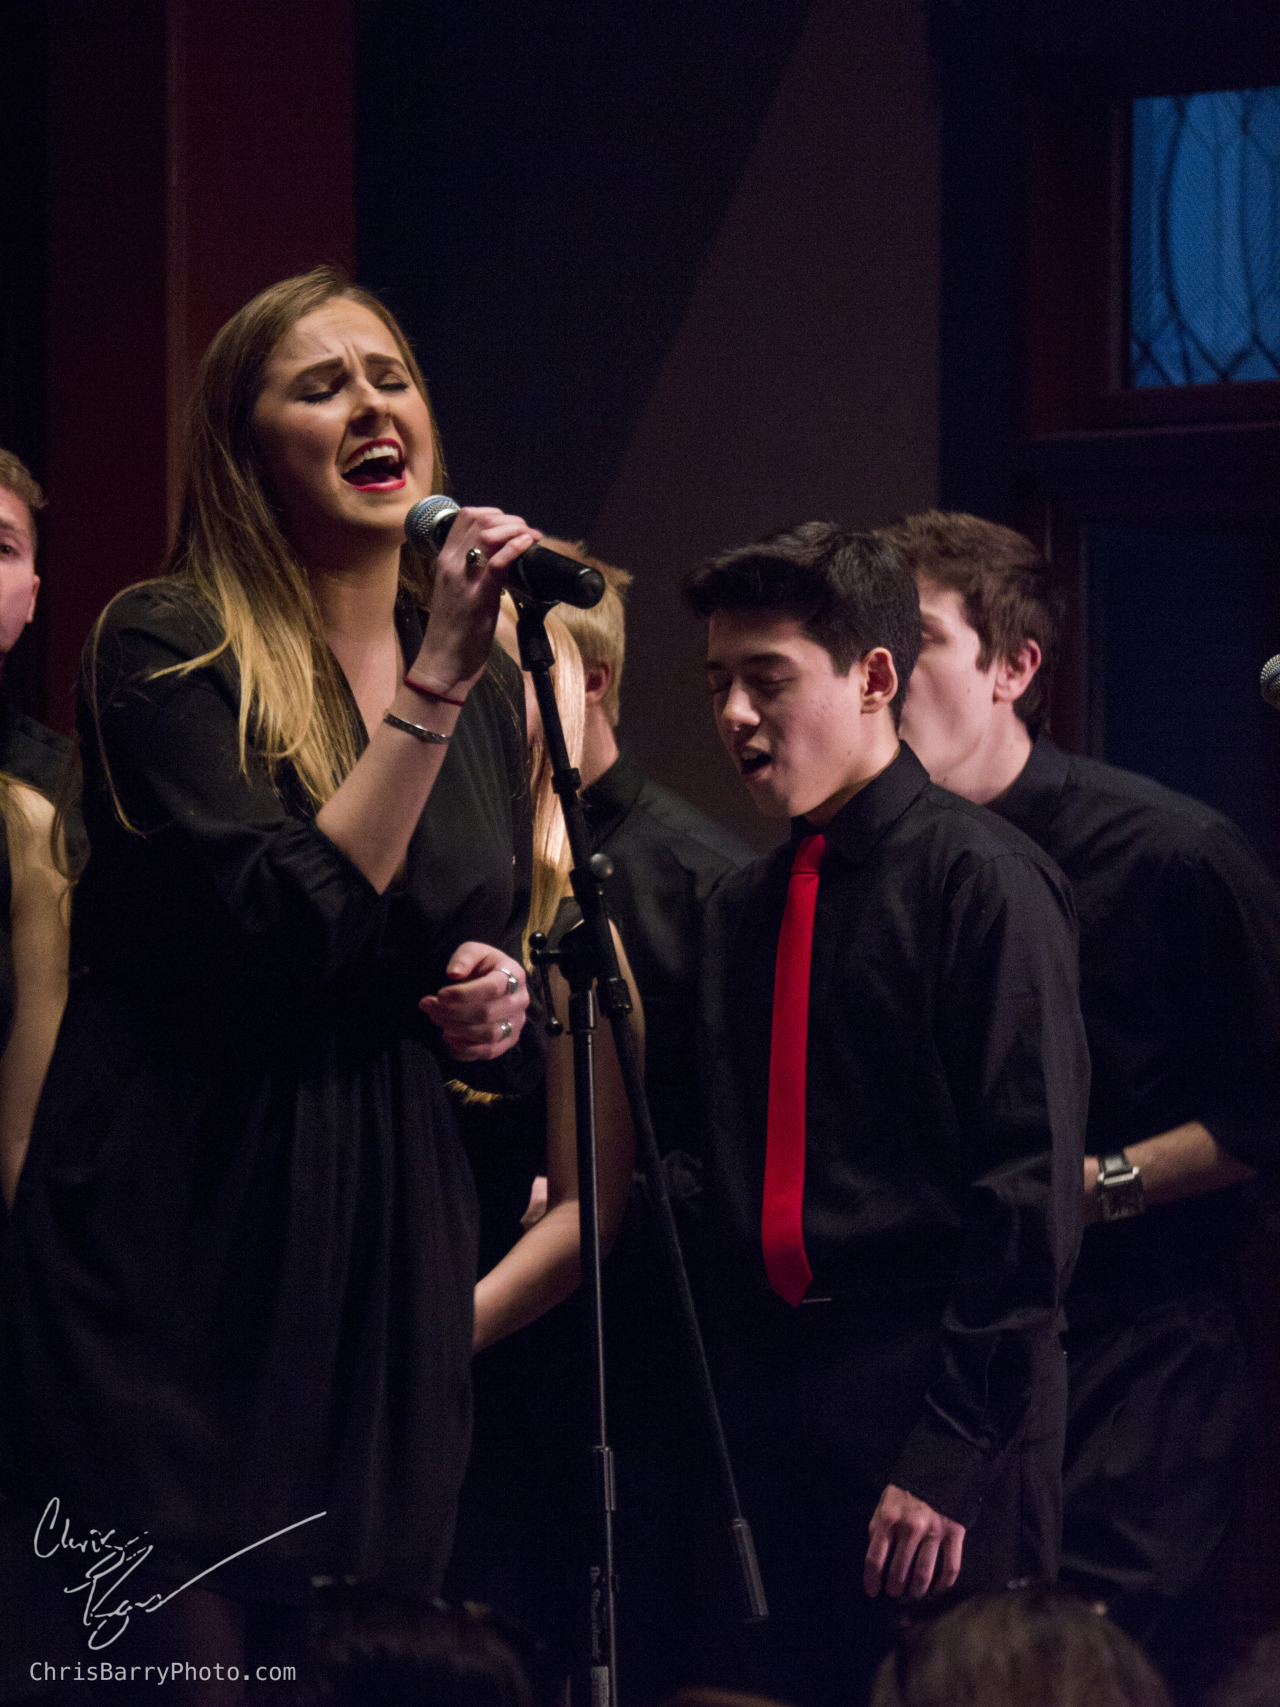 The Melismatics, in generally, were much more photogenic while singing than most of the bands at battle of the bands